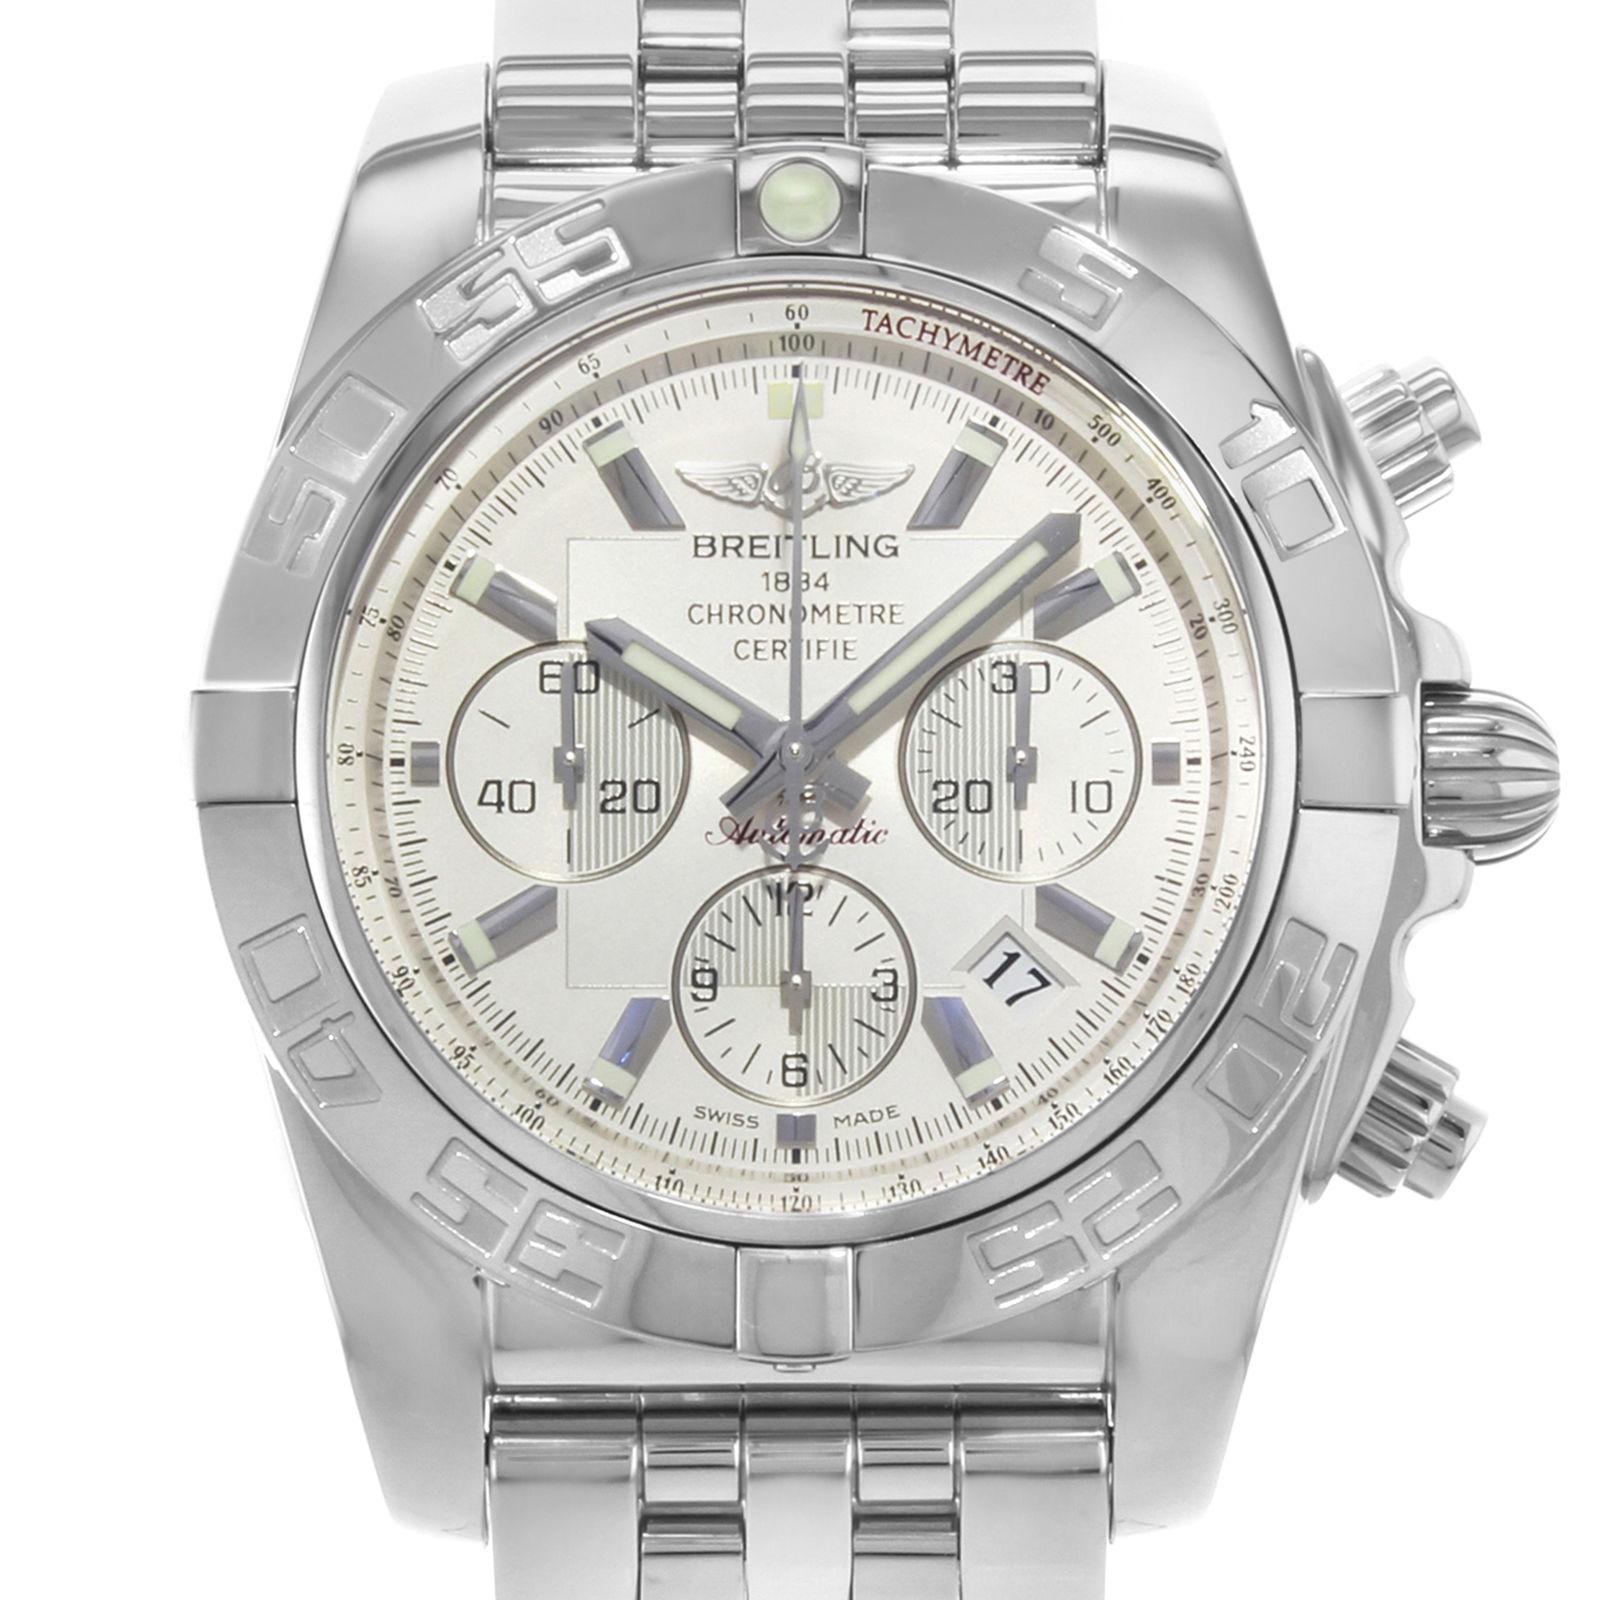 This display model Breitling Chronomat AB011012/G684-375A is a beautiful men's timepiece that is powered by an automatic movement which is cased in a stainless steel case. It has a round shape face, chronograph, date, small seconds subdial dial, and